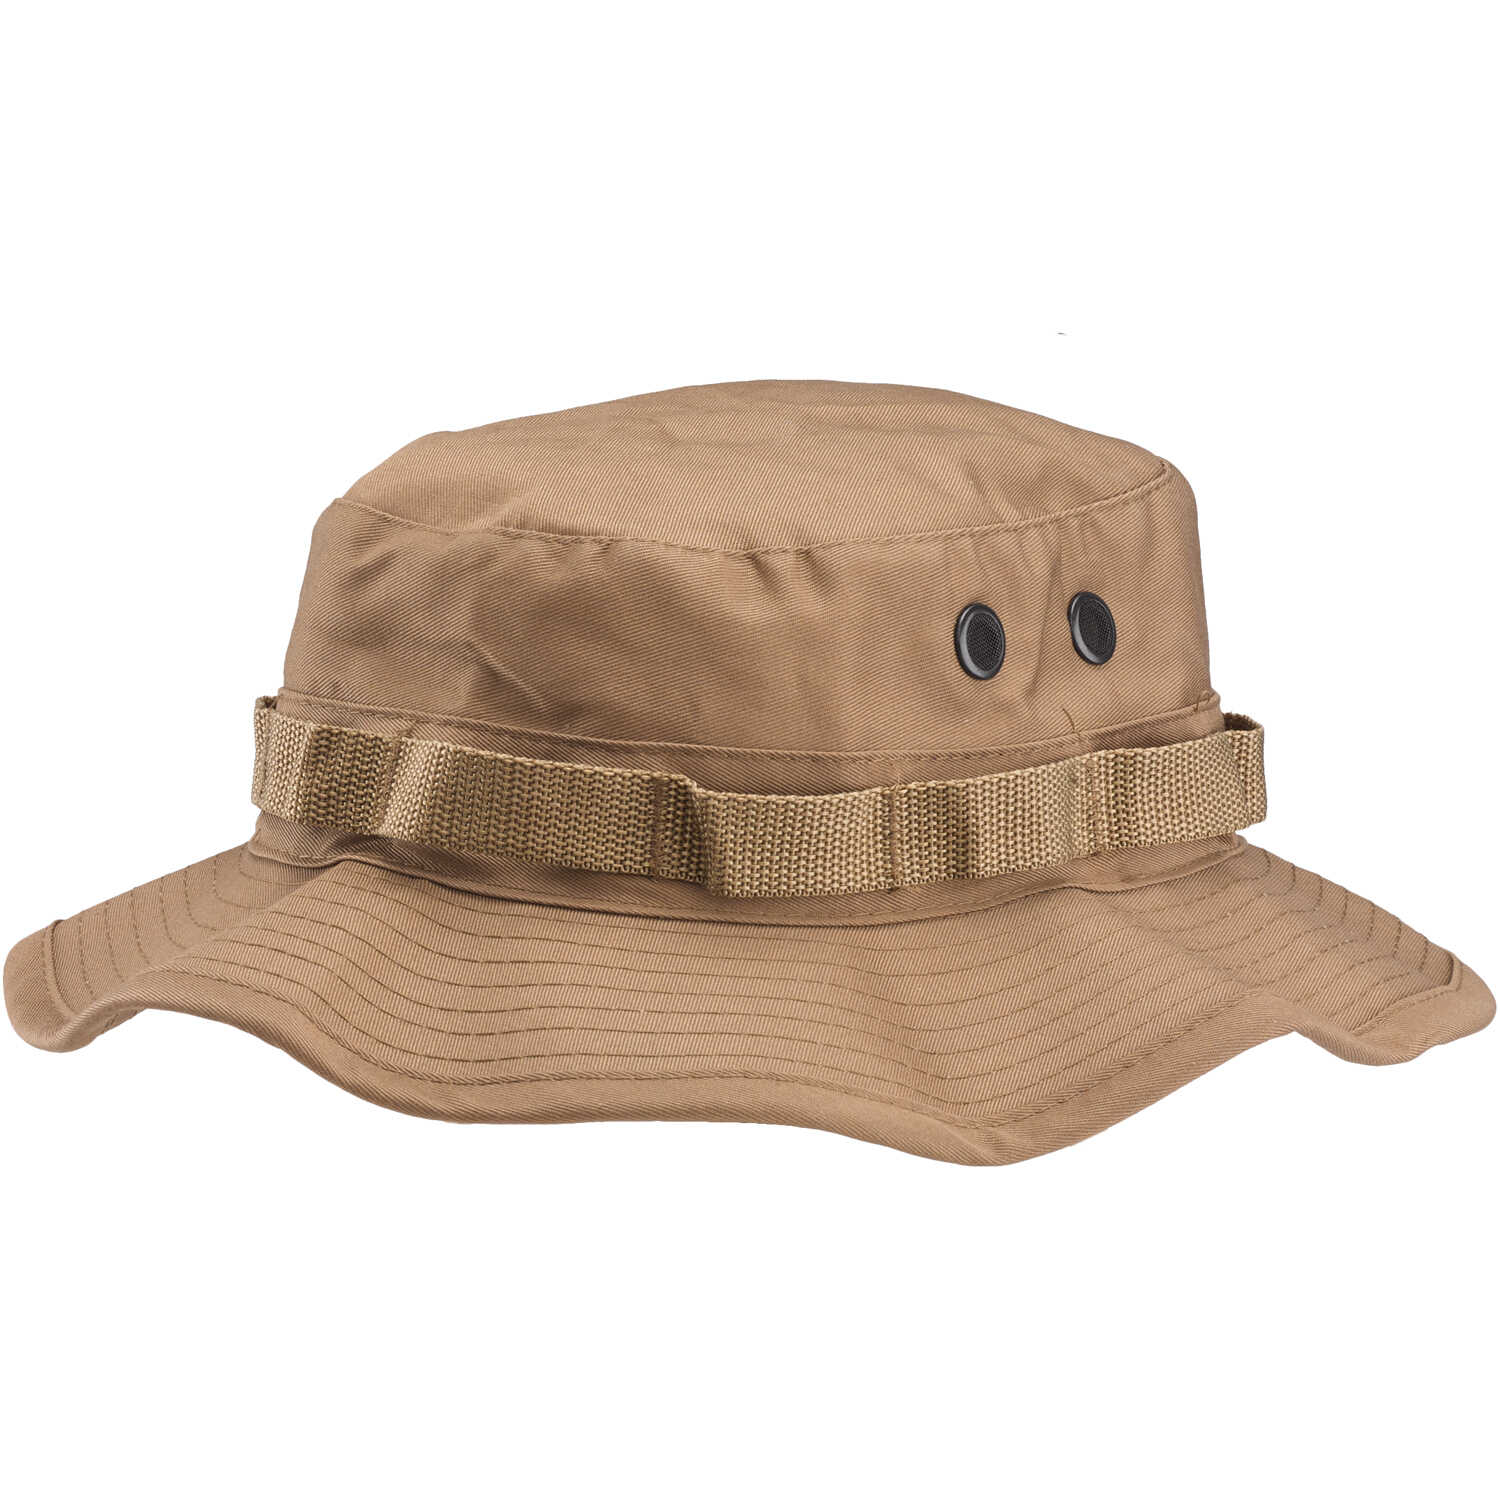 Olive Drab Military Boonie Hat Rothco 5811